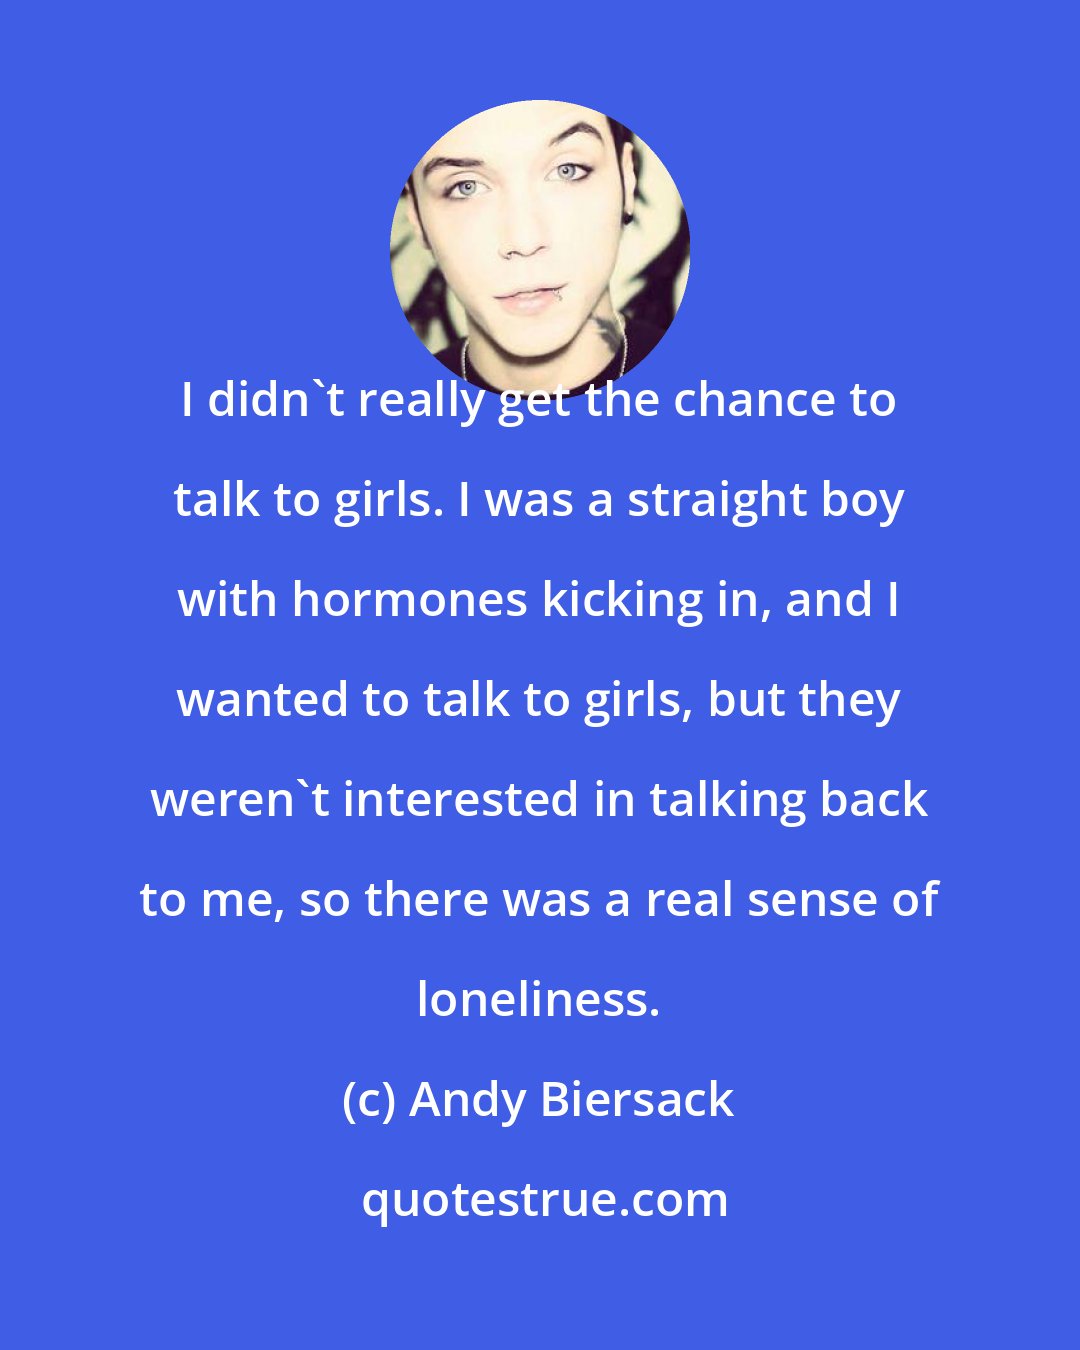 Andy Biersack: I didn't really get the chance to talk to girls. I was a straight boy with hormones kicking in, and I wanted to talk to girls, but they weren't interested in talking back to me, so there was a real sense of loneliness.